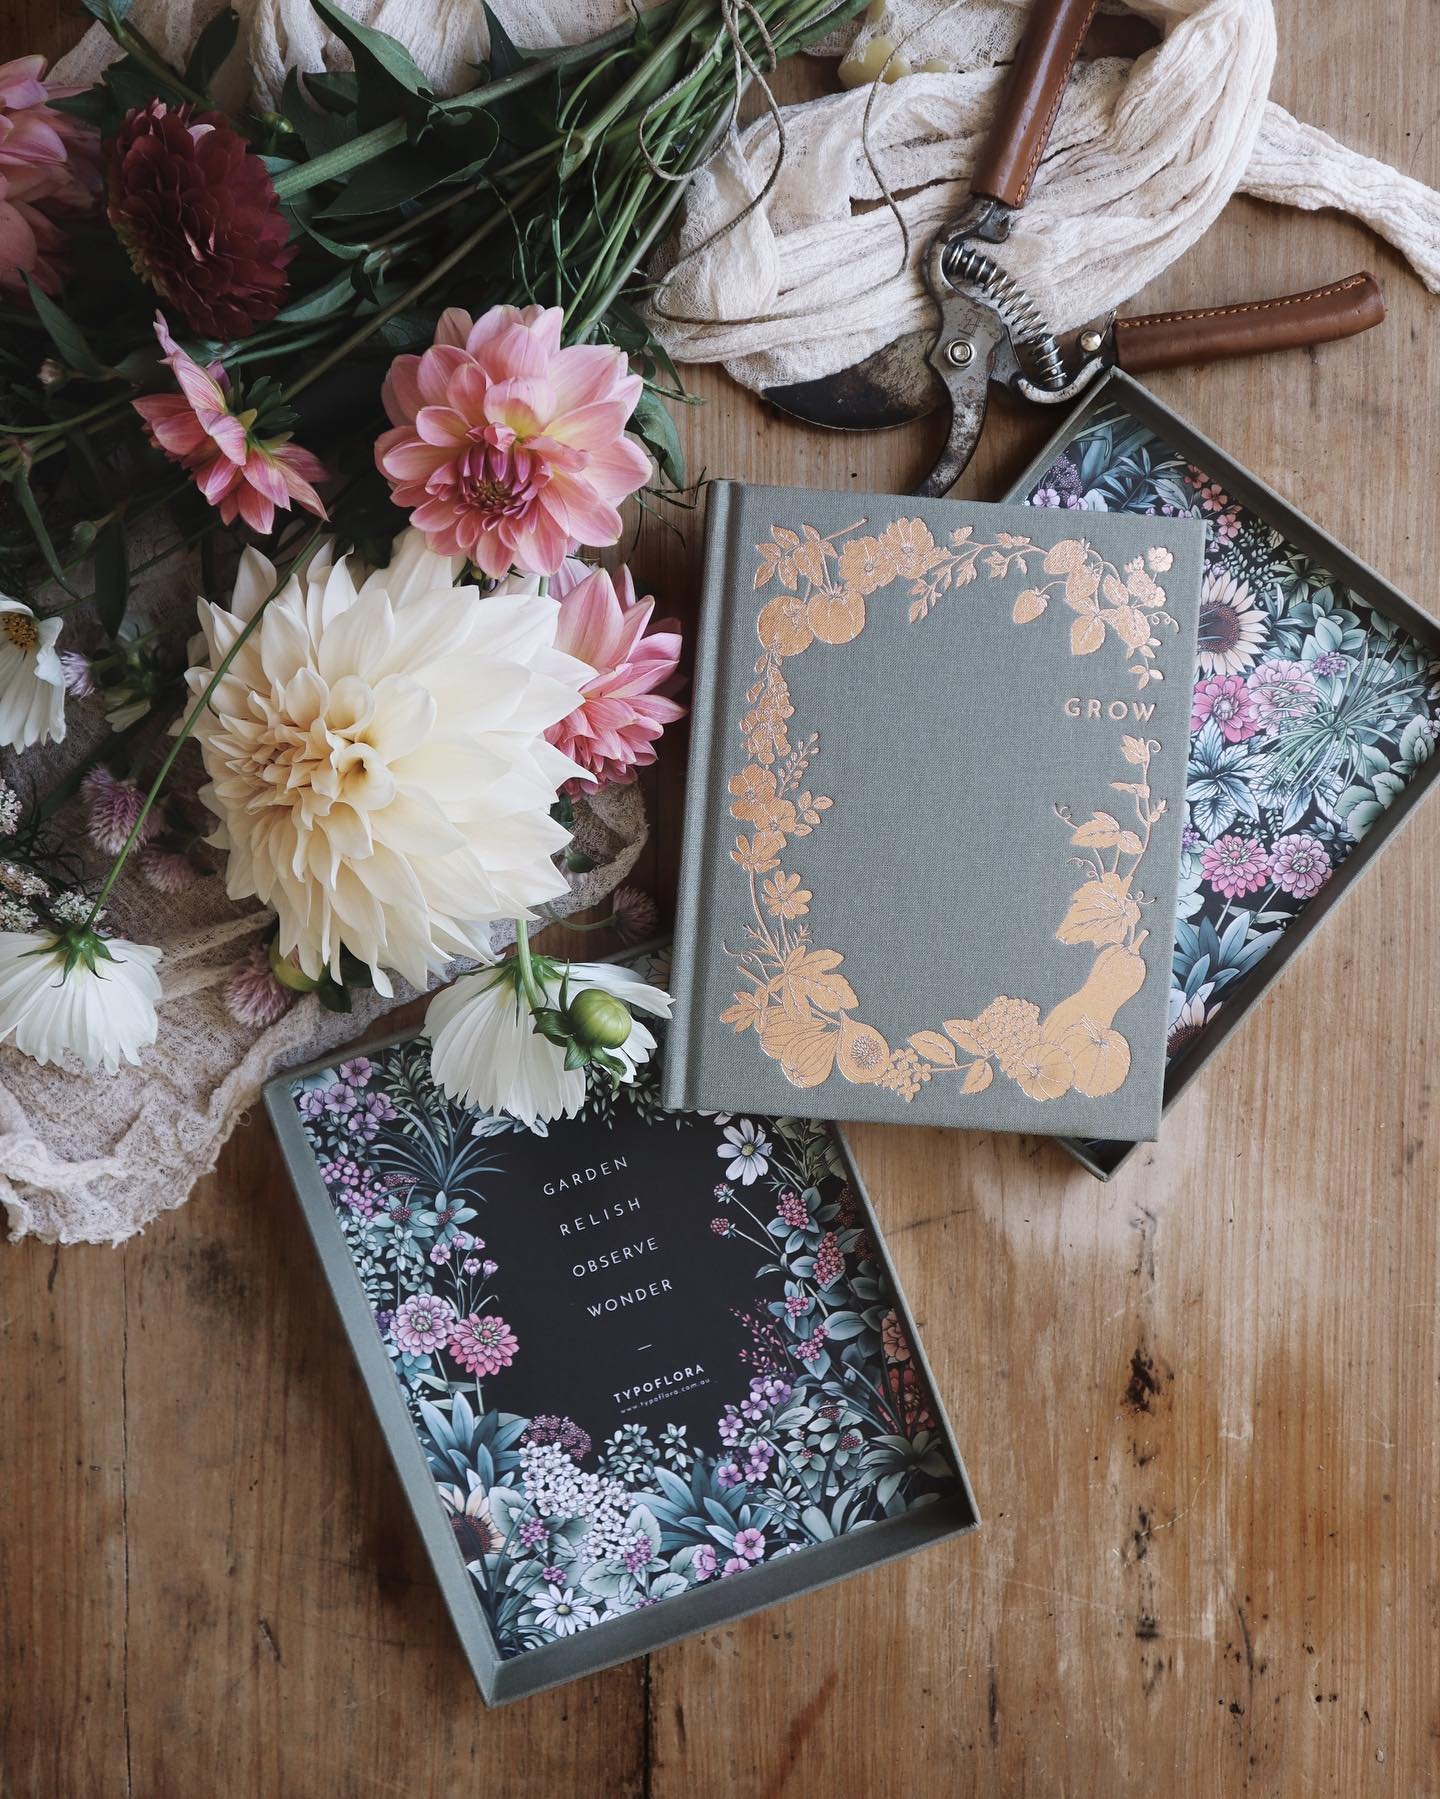 Our Grow Garden Planner is an undated guided journal for keeping track on gardening notes and progress. As the seasons shift towards Autumn and Winter, seize the opportunity to map out your garden aspirations, chart the progress of your plants, arran